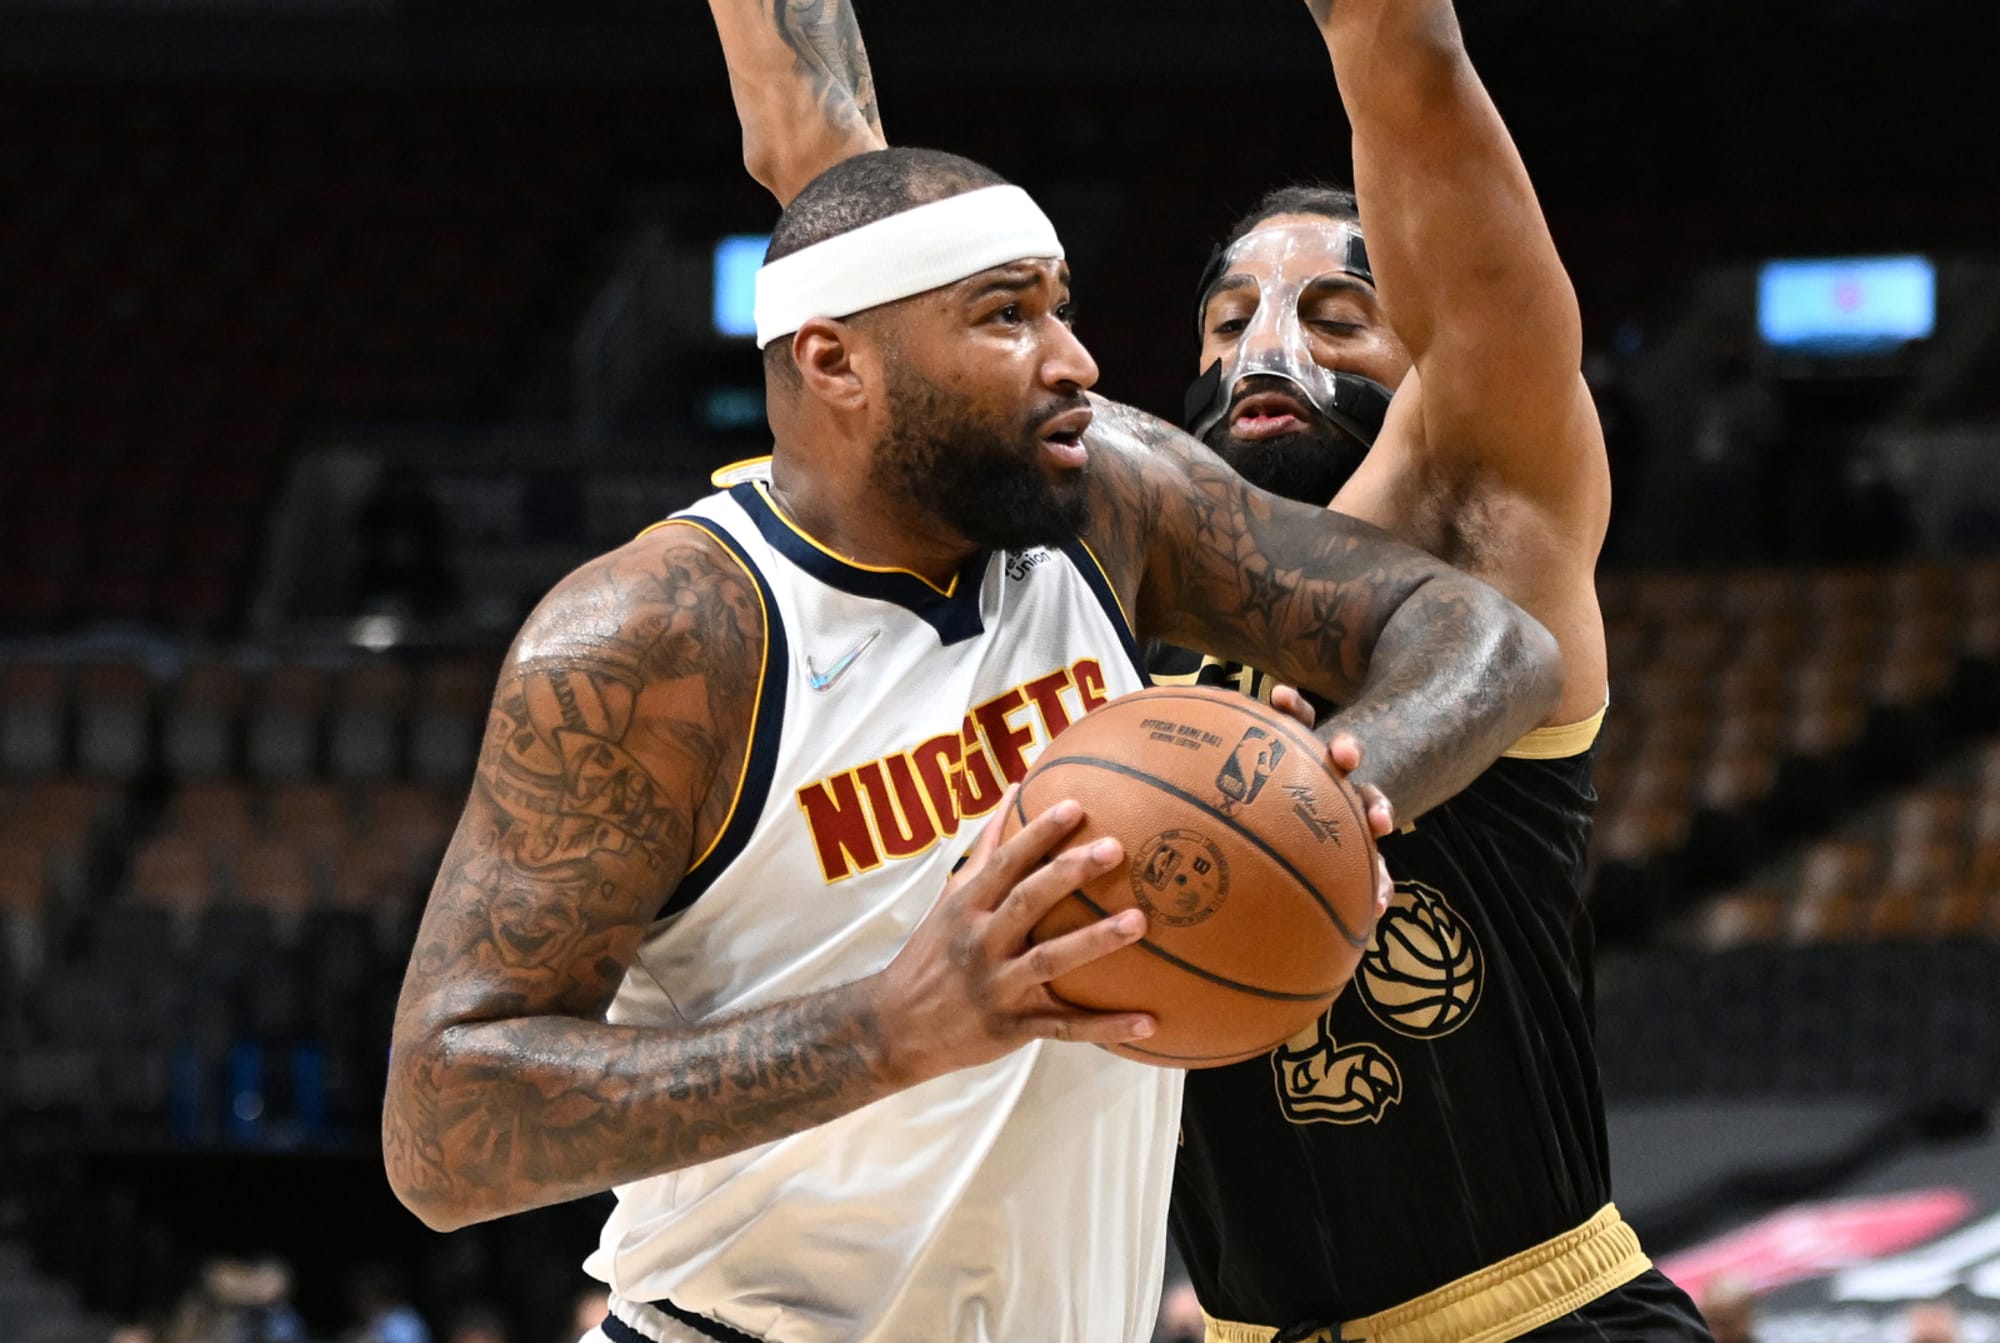 DeMarcus Cousins Puts Up 40 Points and Gets 22 Rebounds